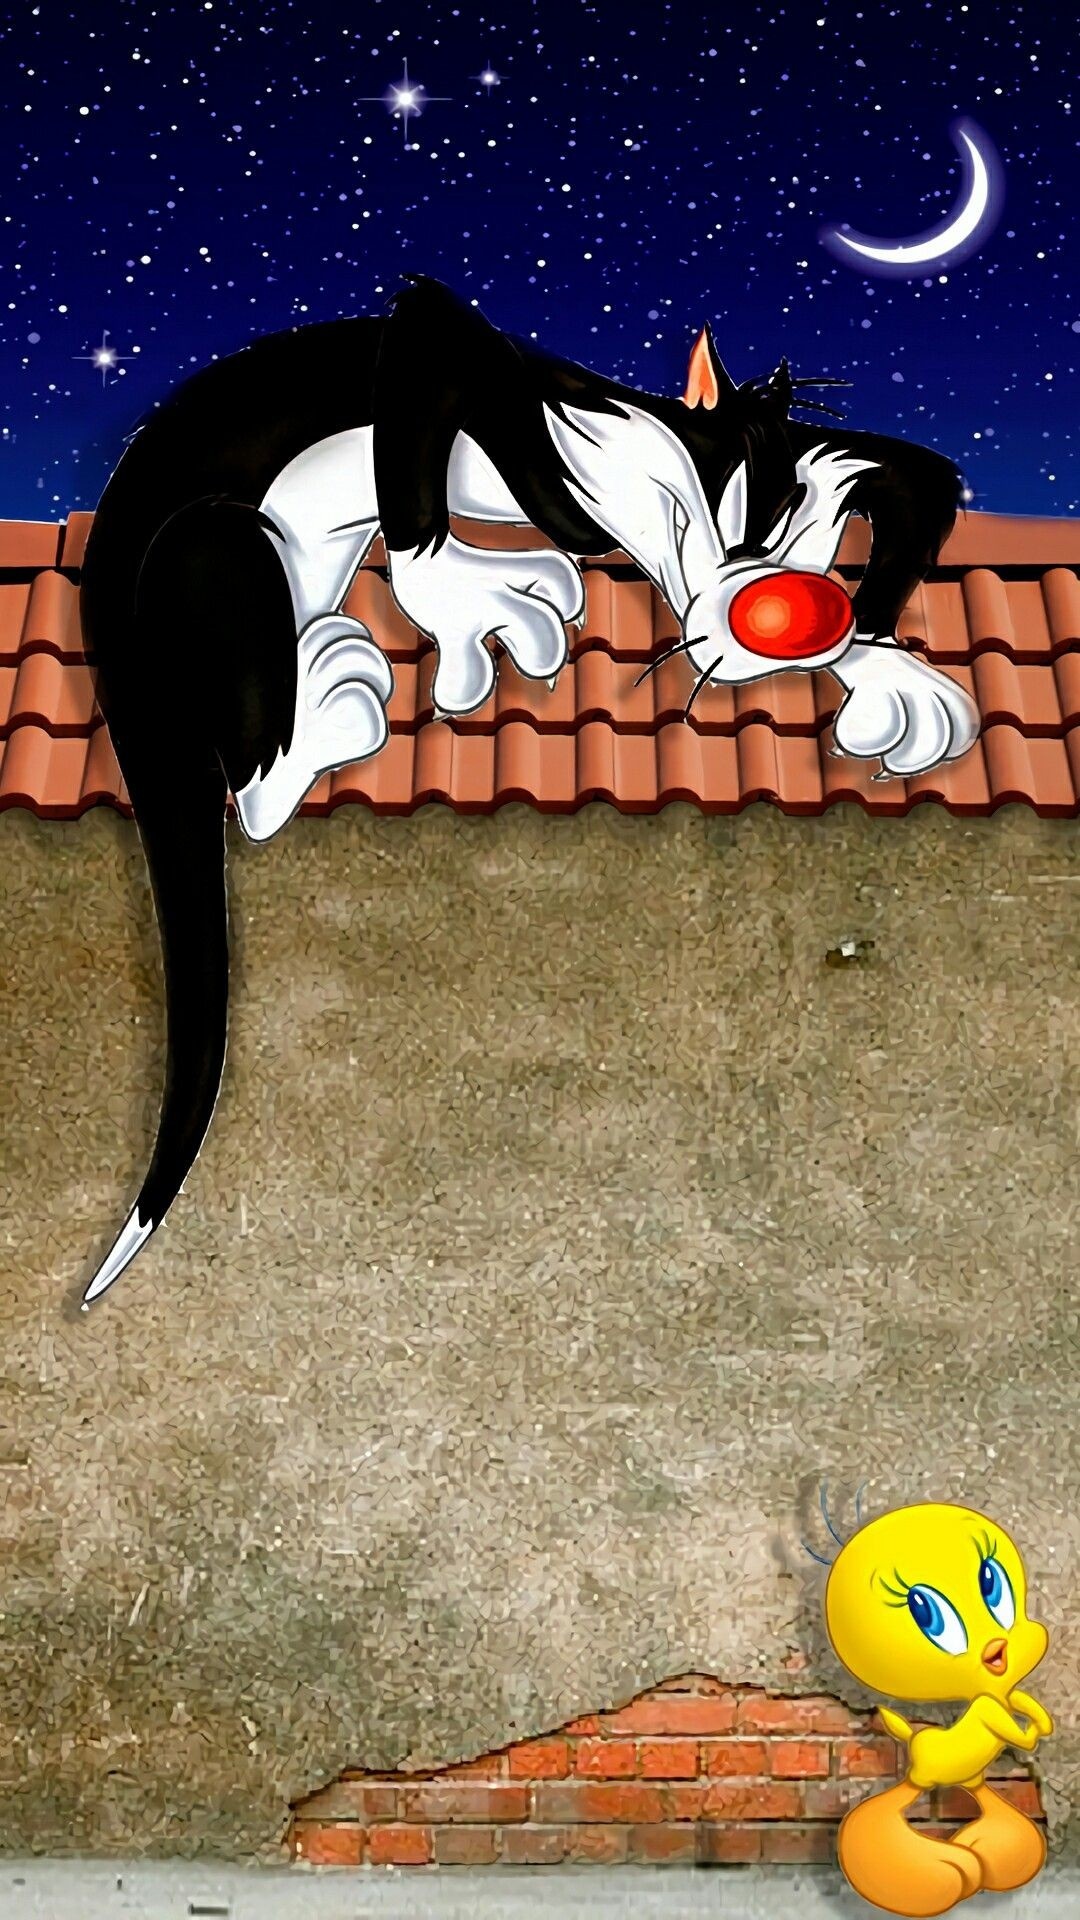 Baby Looney Tunes wallpaper, Adorable pictures, 1080x1920 Full HD Handy